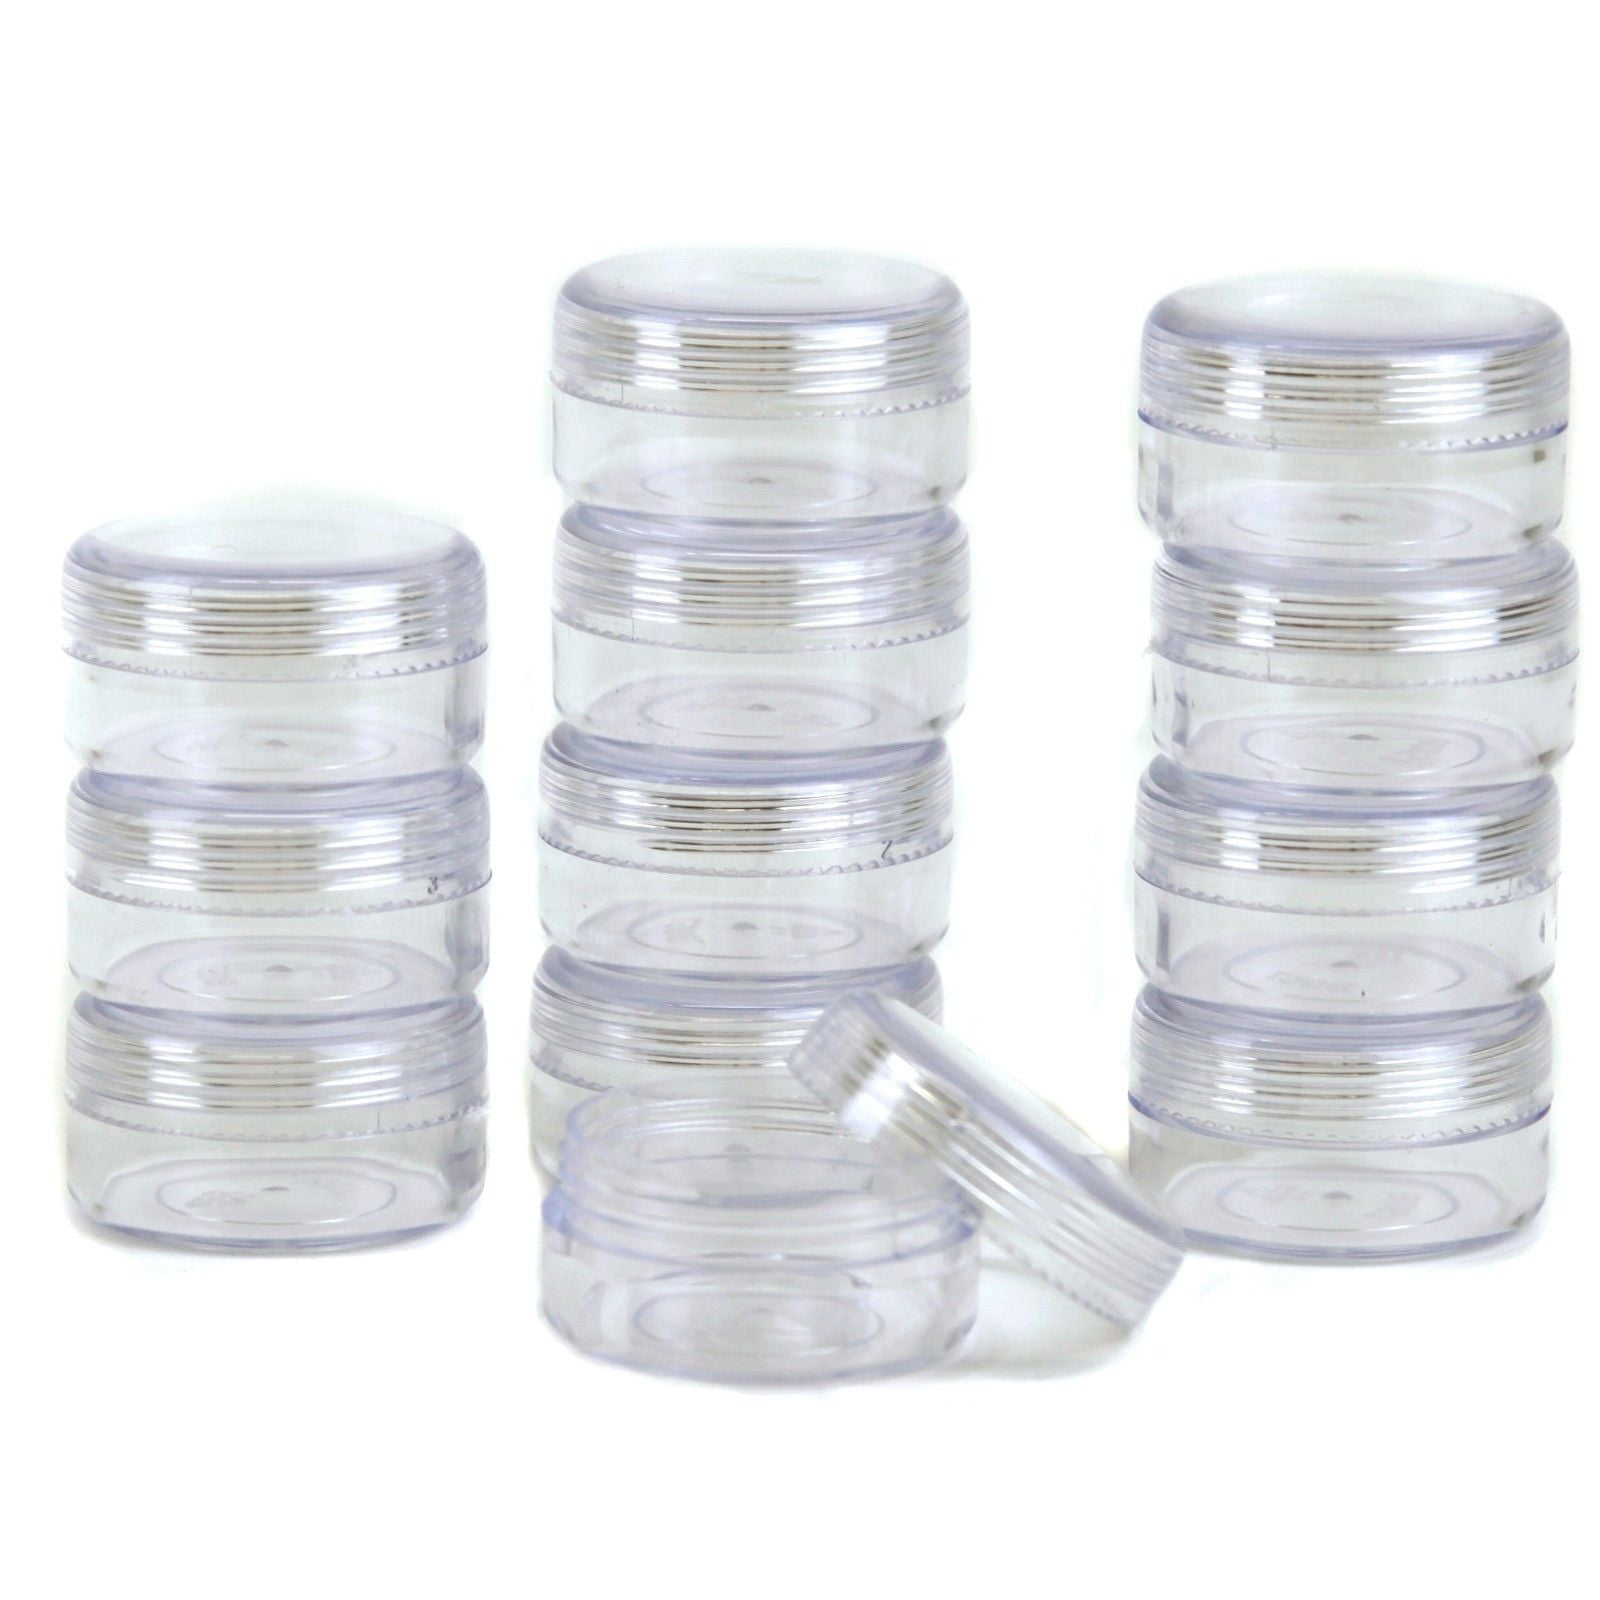 1-16 Multi Listing 2000ml Clear Round Plastic Storage Jars with White Caps